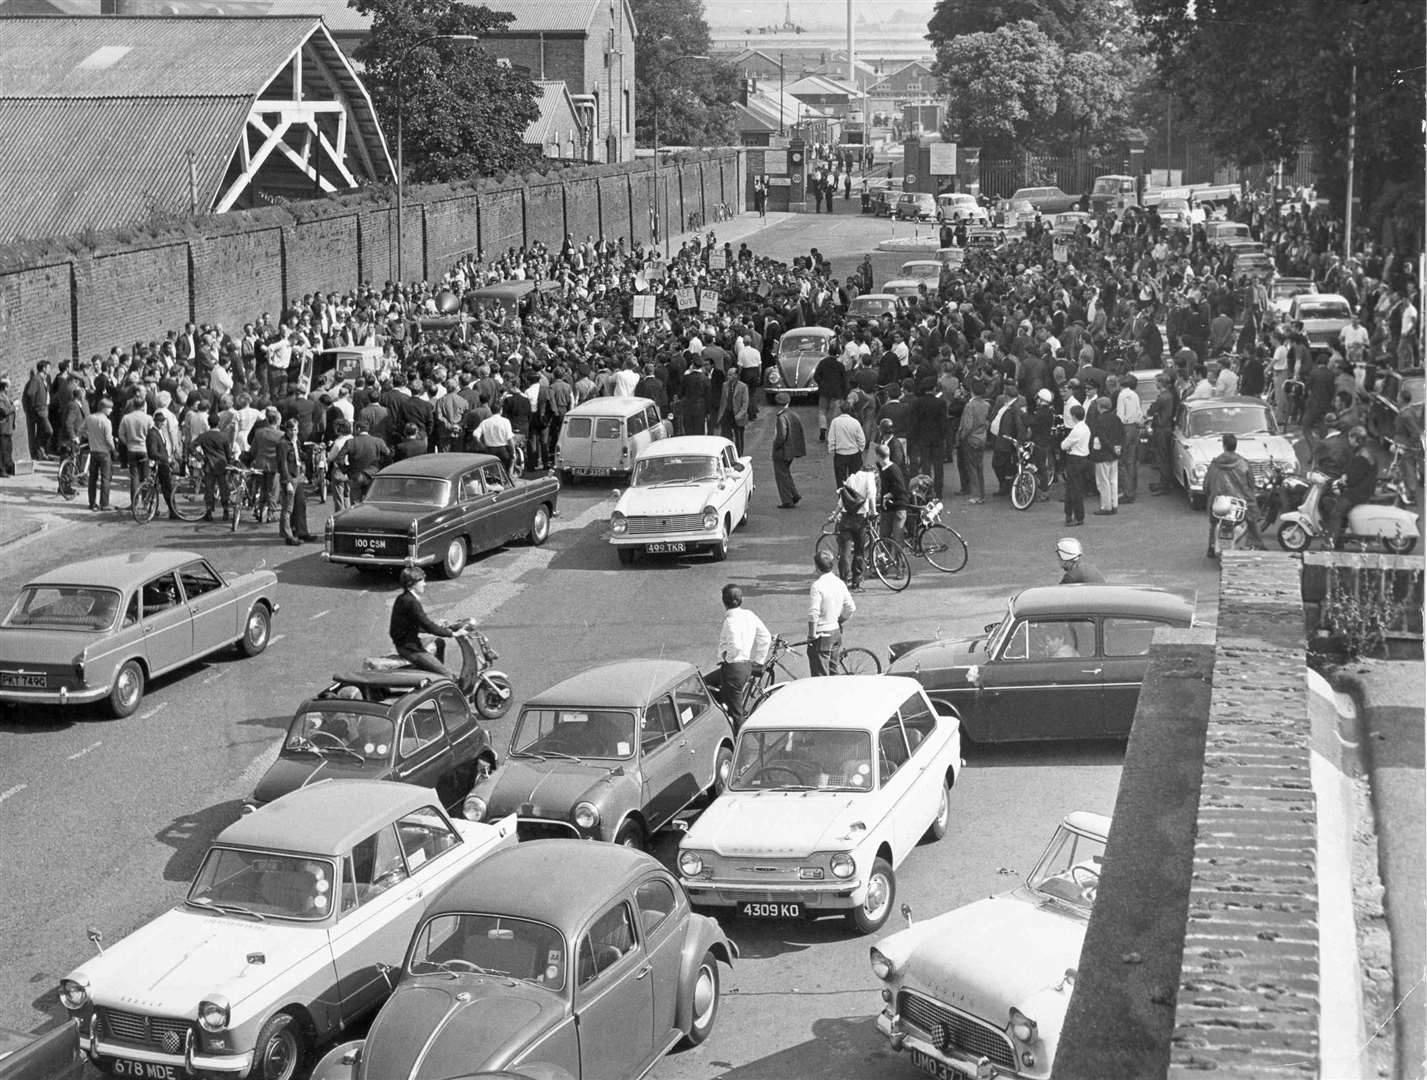 There were plenty of cars by 1969, but many of their drivers were prevented from entering Chatham Dockyard on this occasion by a massed gathering of strikers